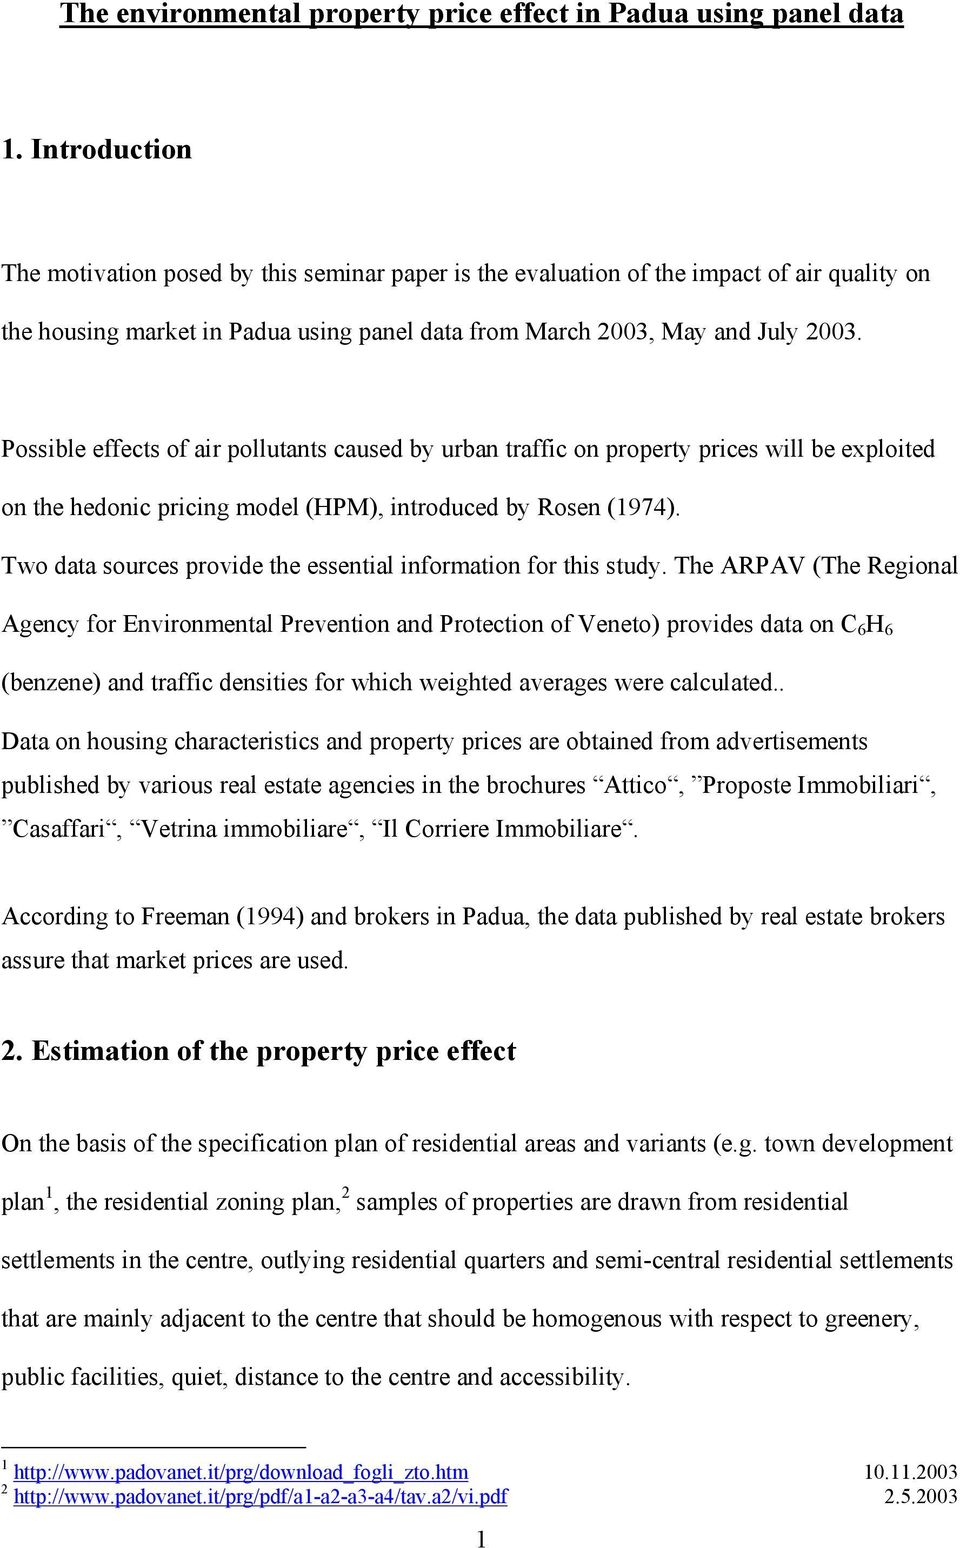 Possible effects of air pollutants caused by urban traffic on property prices will be exploited on the hedonic pricing model (HPM), introduced by Rosen (1974).